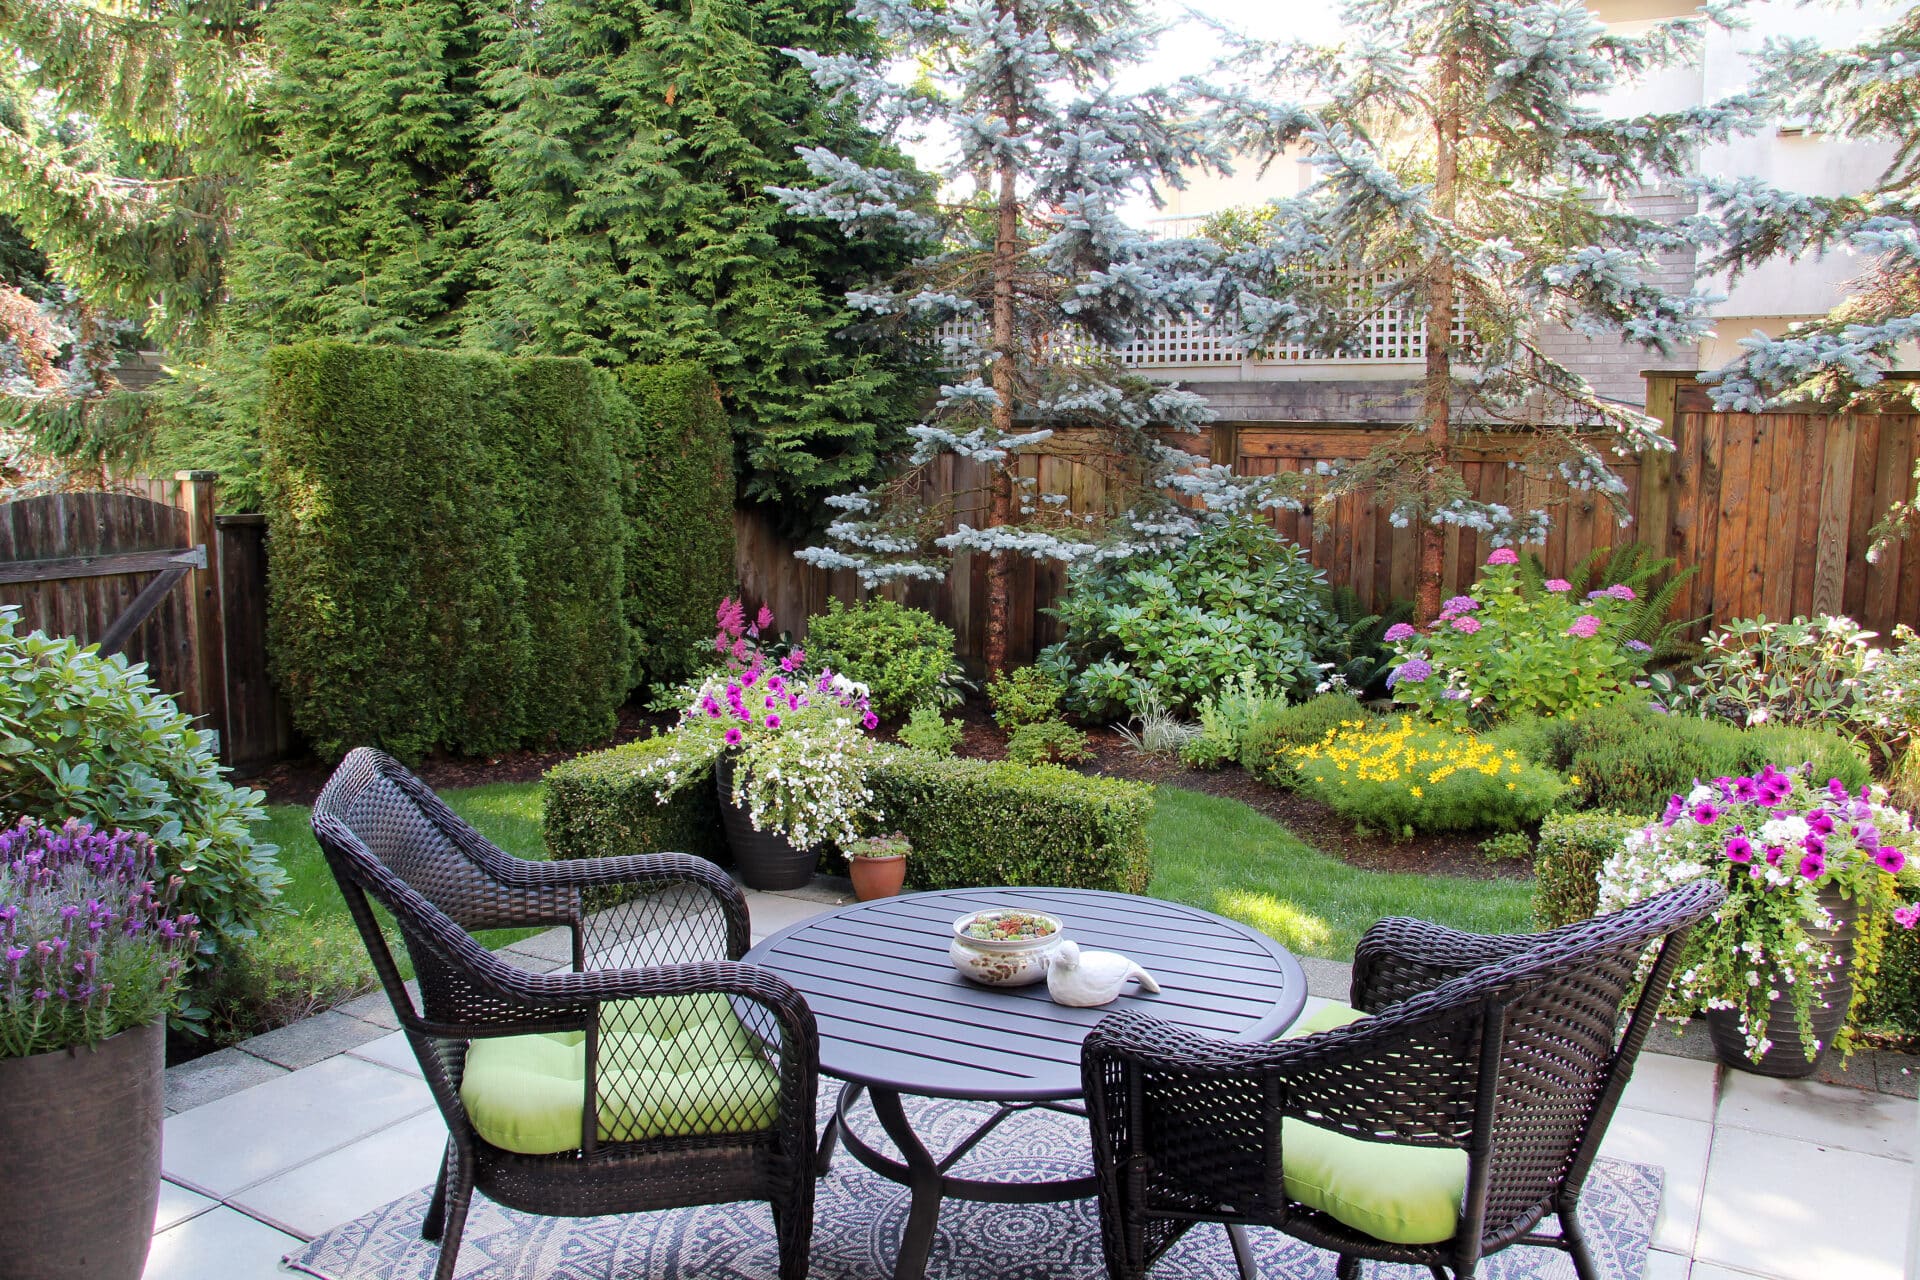 Landscaping and Gardening Tips for a Beautiful and Well-Maintained Yard